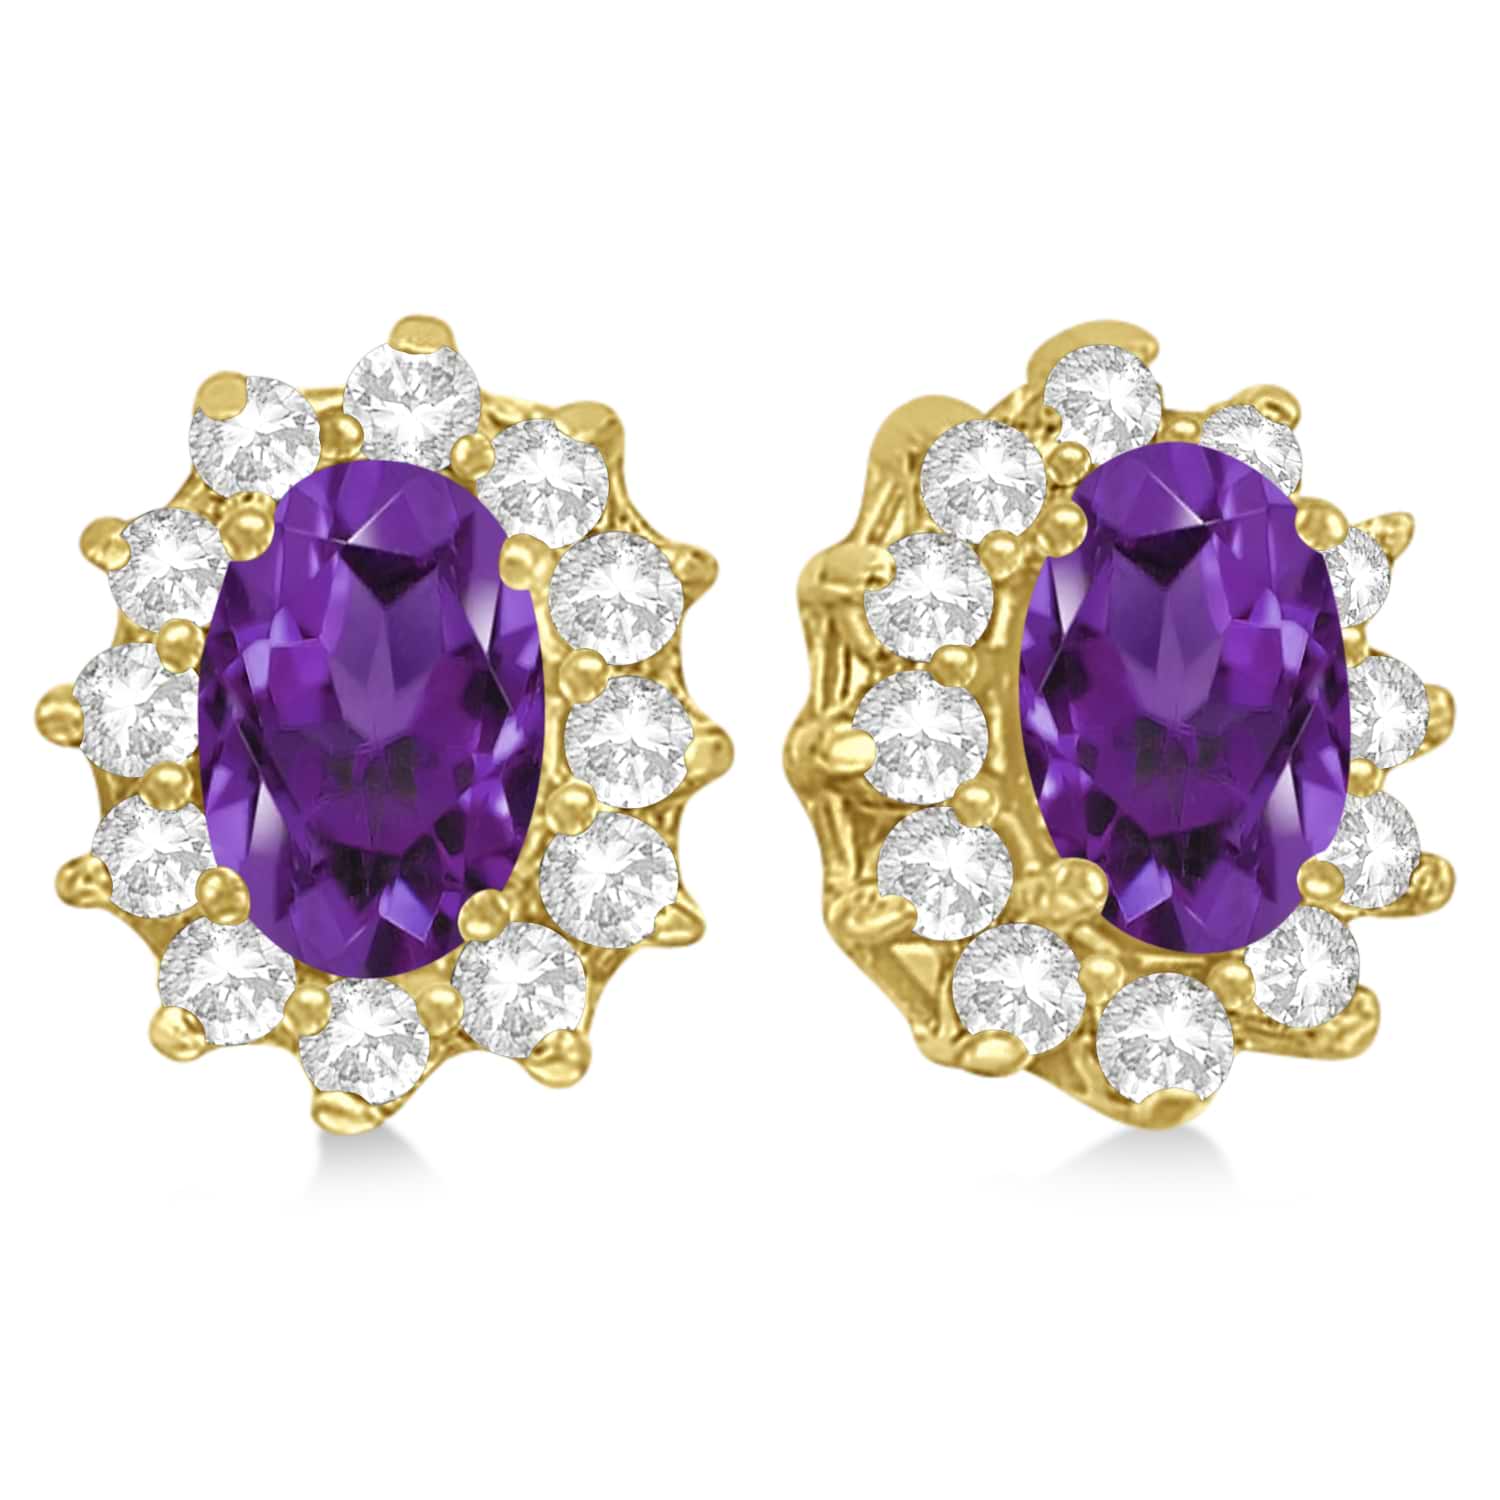 Oval Amethyst & Diamond Accented Earrings 14k Yellow Gold (2.05ct)